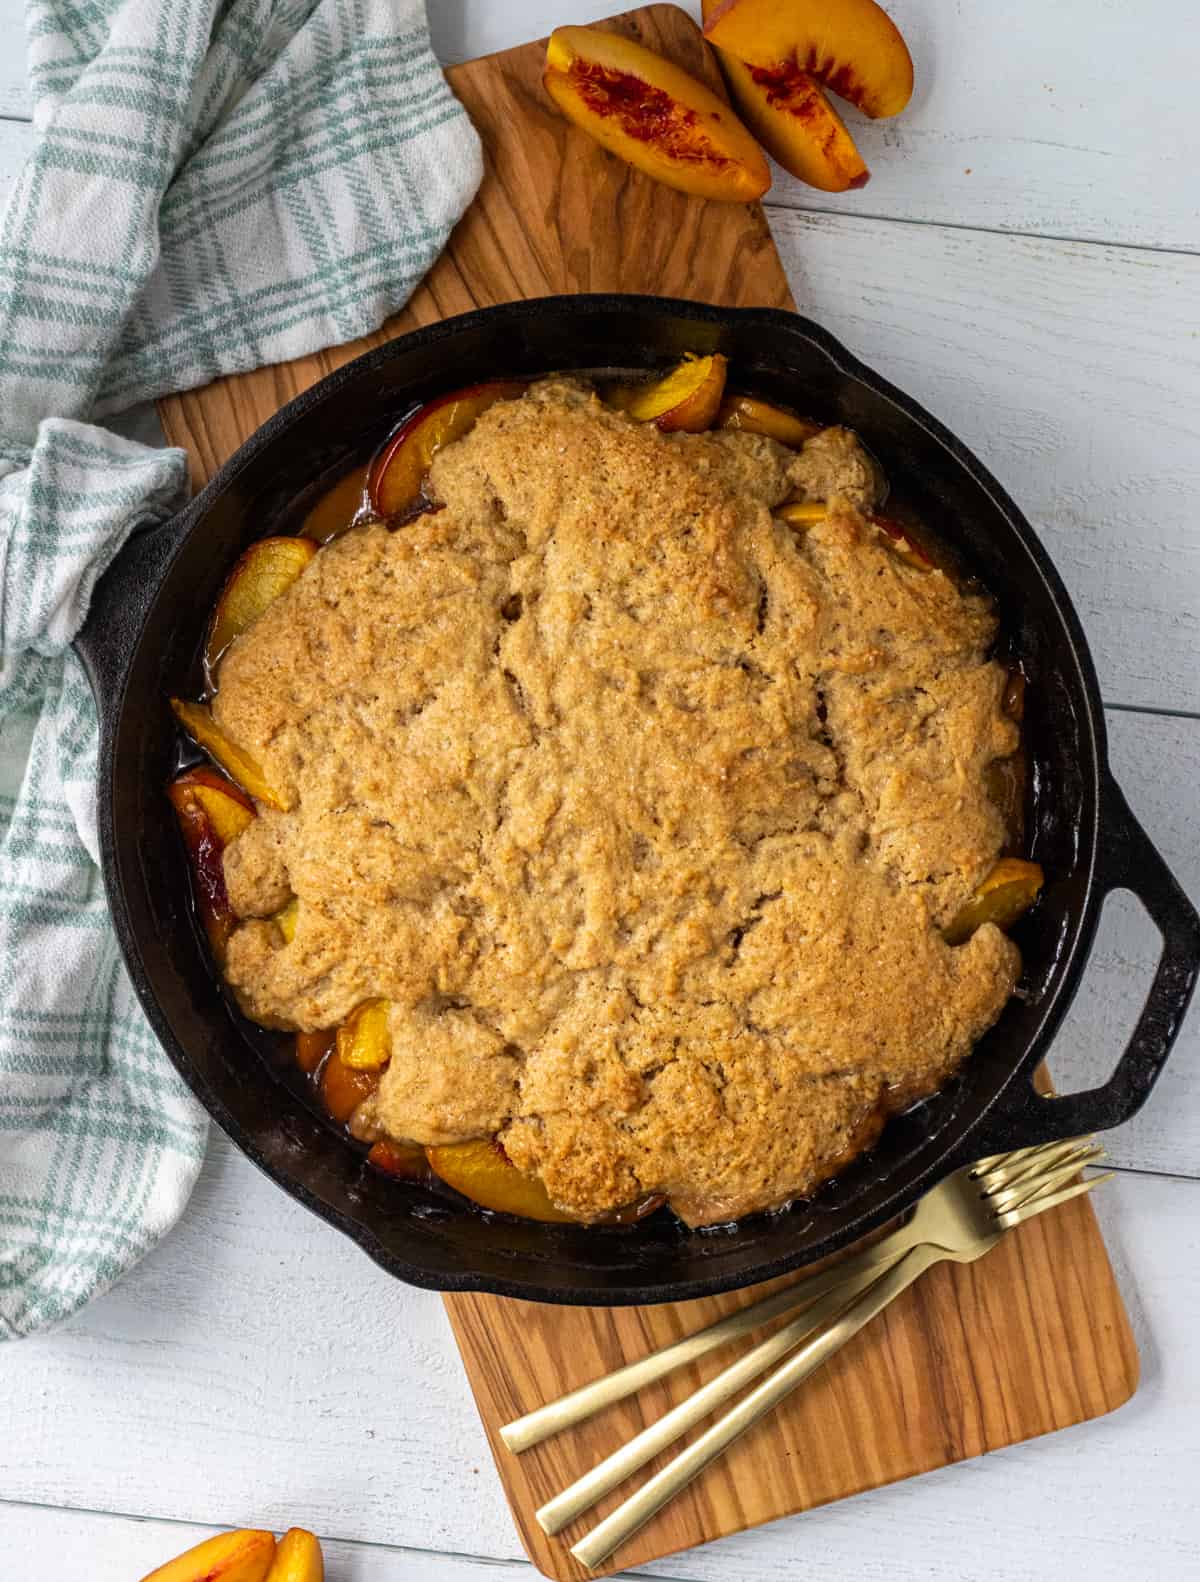 Peach cobbler in a cast iron skillet on a board with fresh peach slices and a pile of forks.